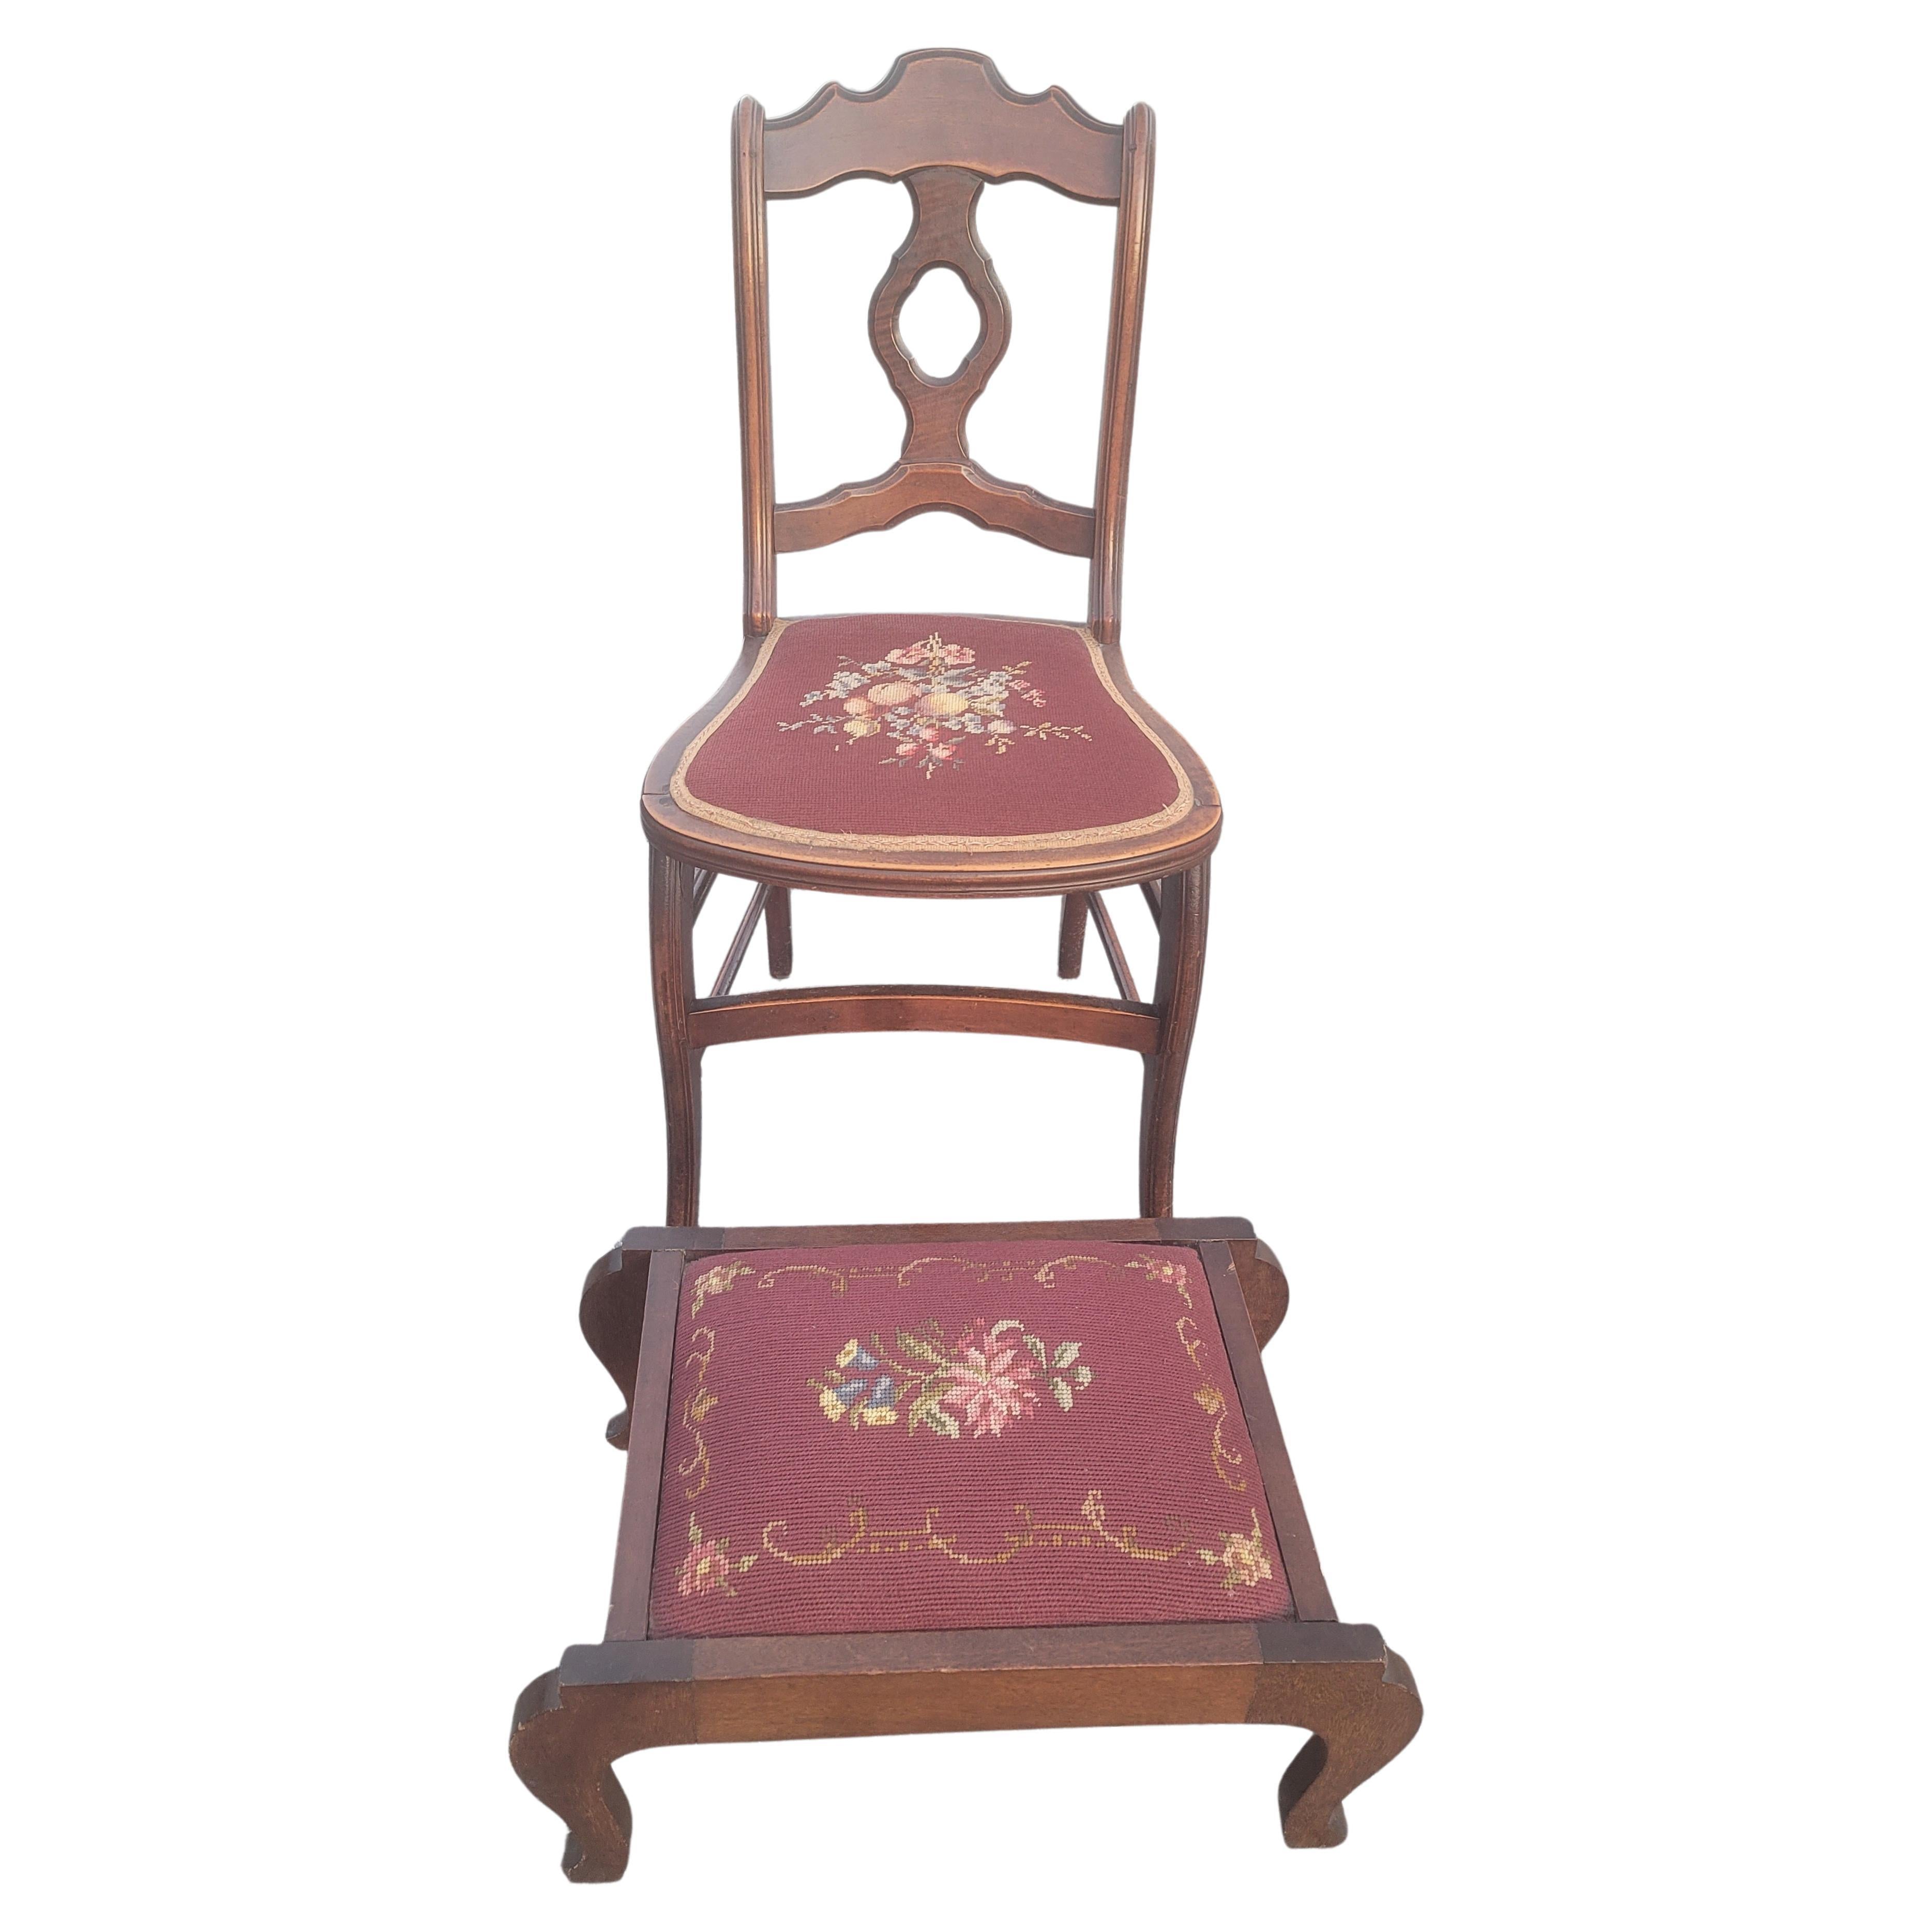 Late 19th century victorian mahogany and needlepoint upholstered chair with matching footstool. 
Chair measures 17